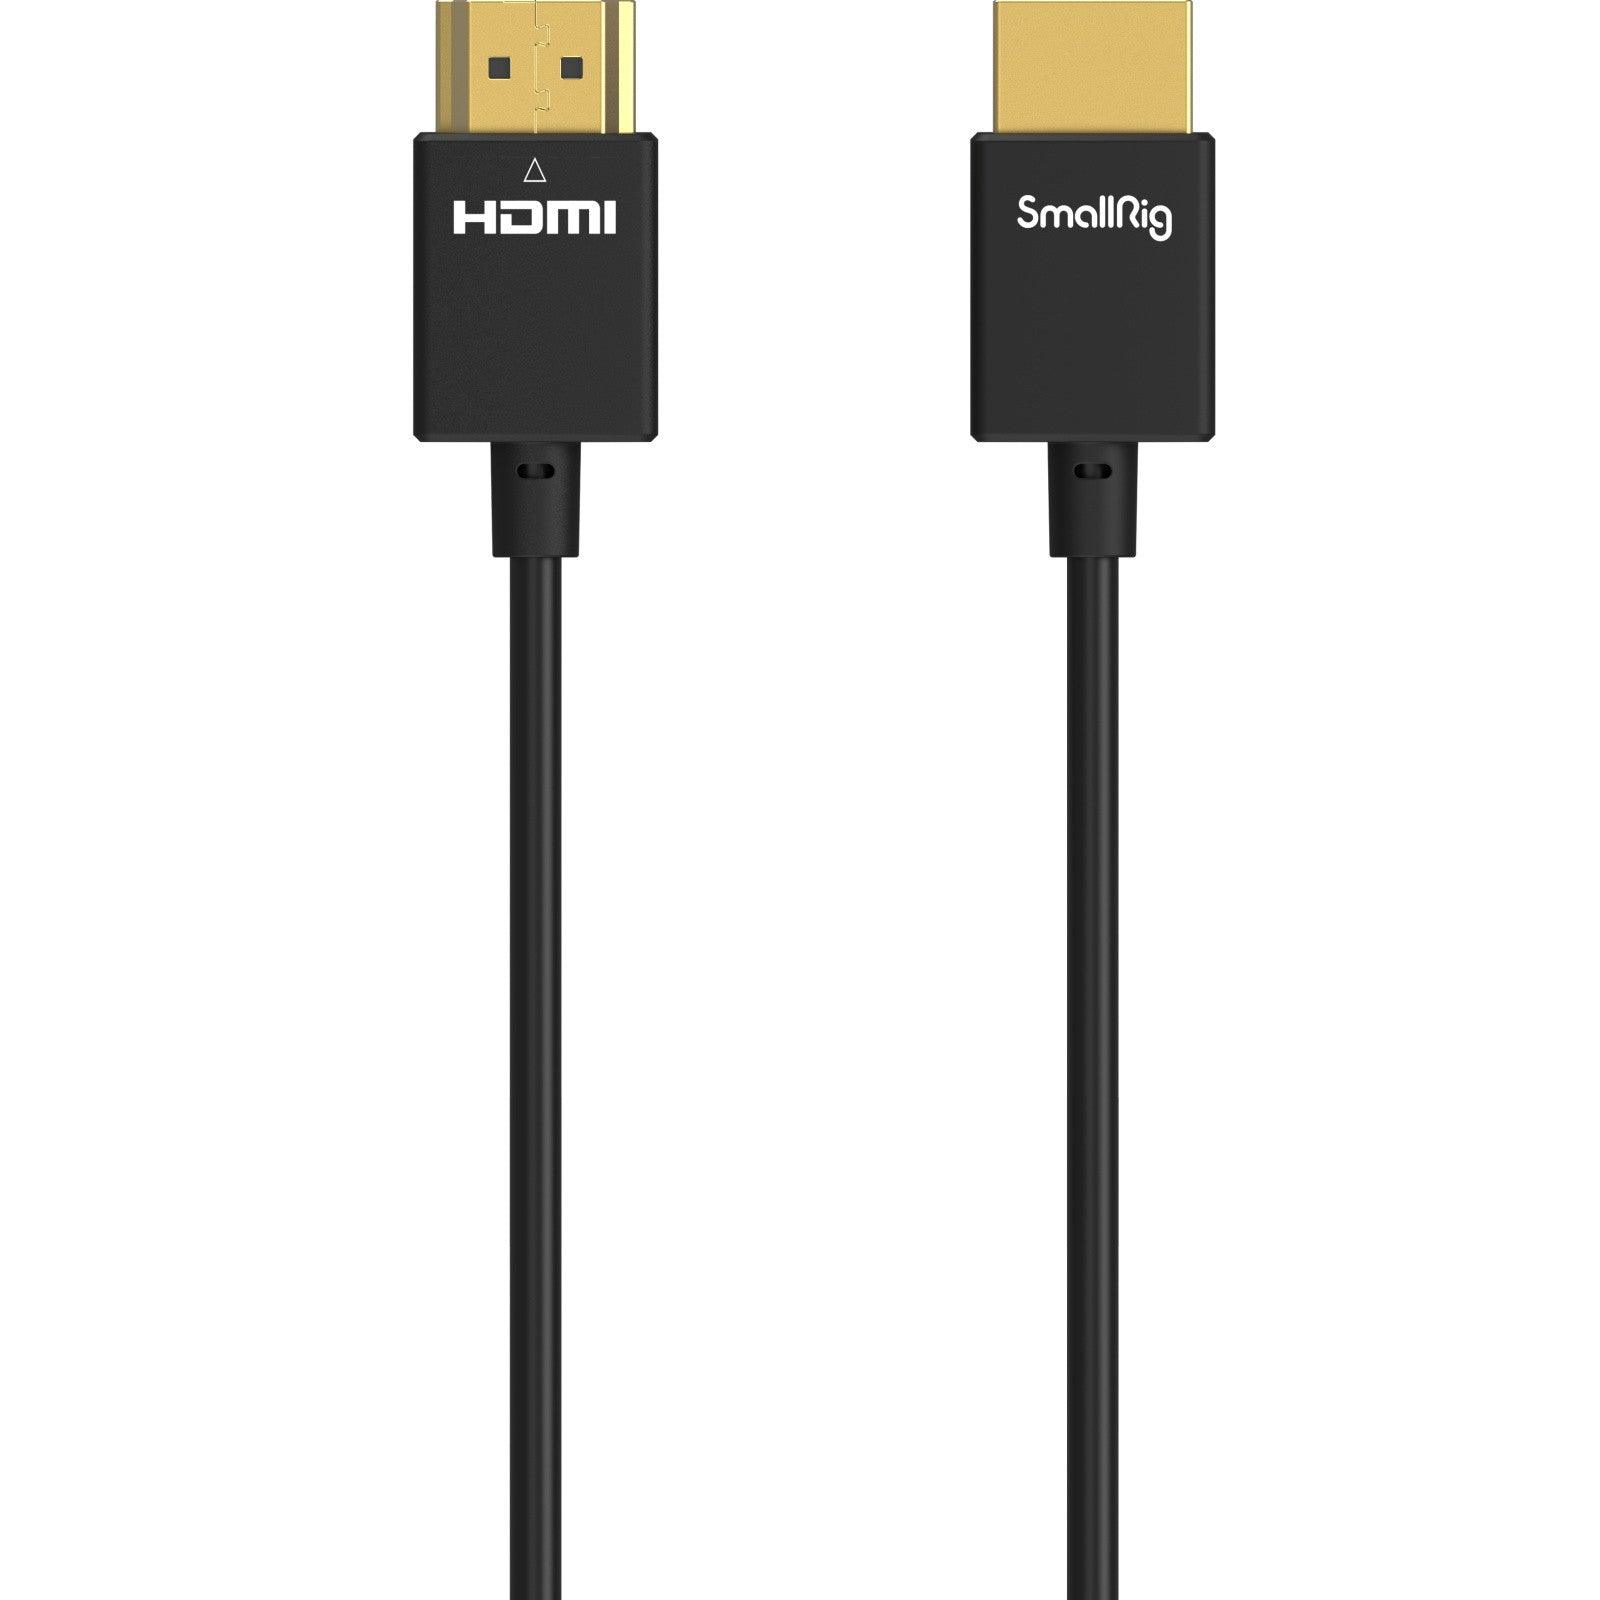 SmallRig Ultra-Slim 4K HDMI Data Cable (A to A) (55cm) 2957B - Cinegear Middle-East S.A.L